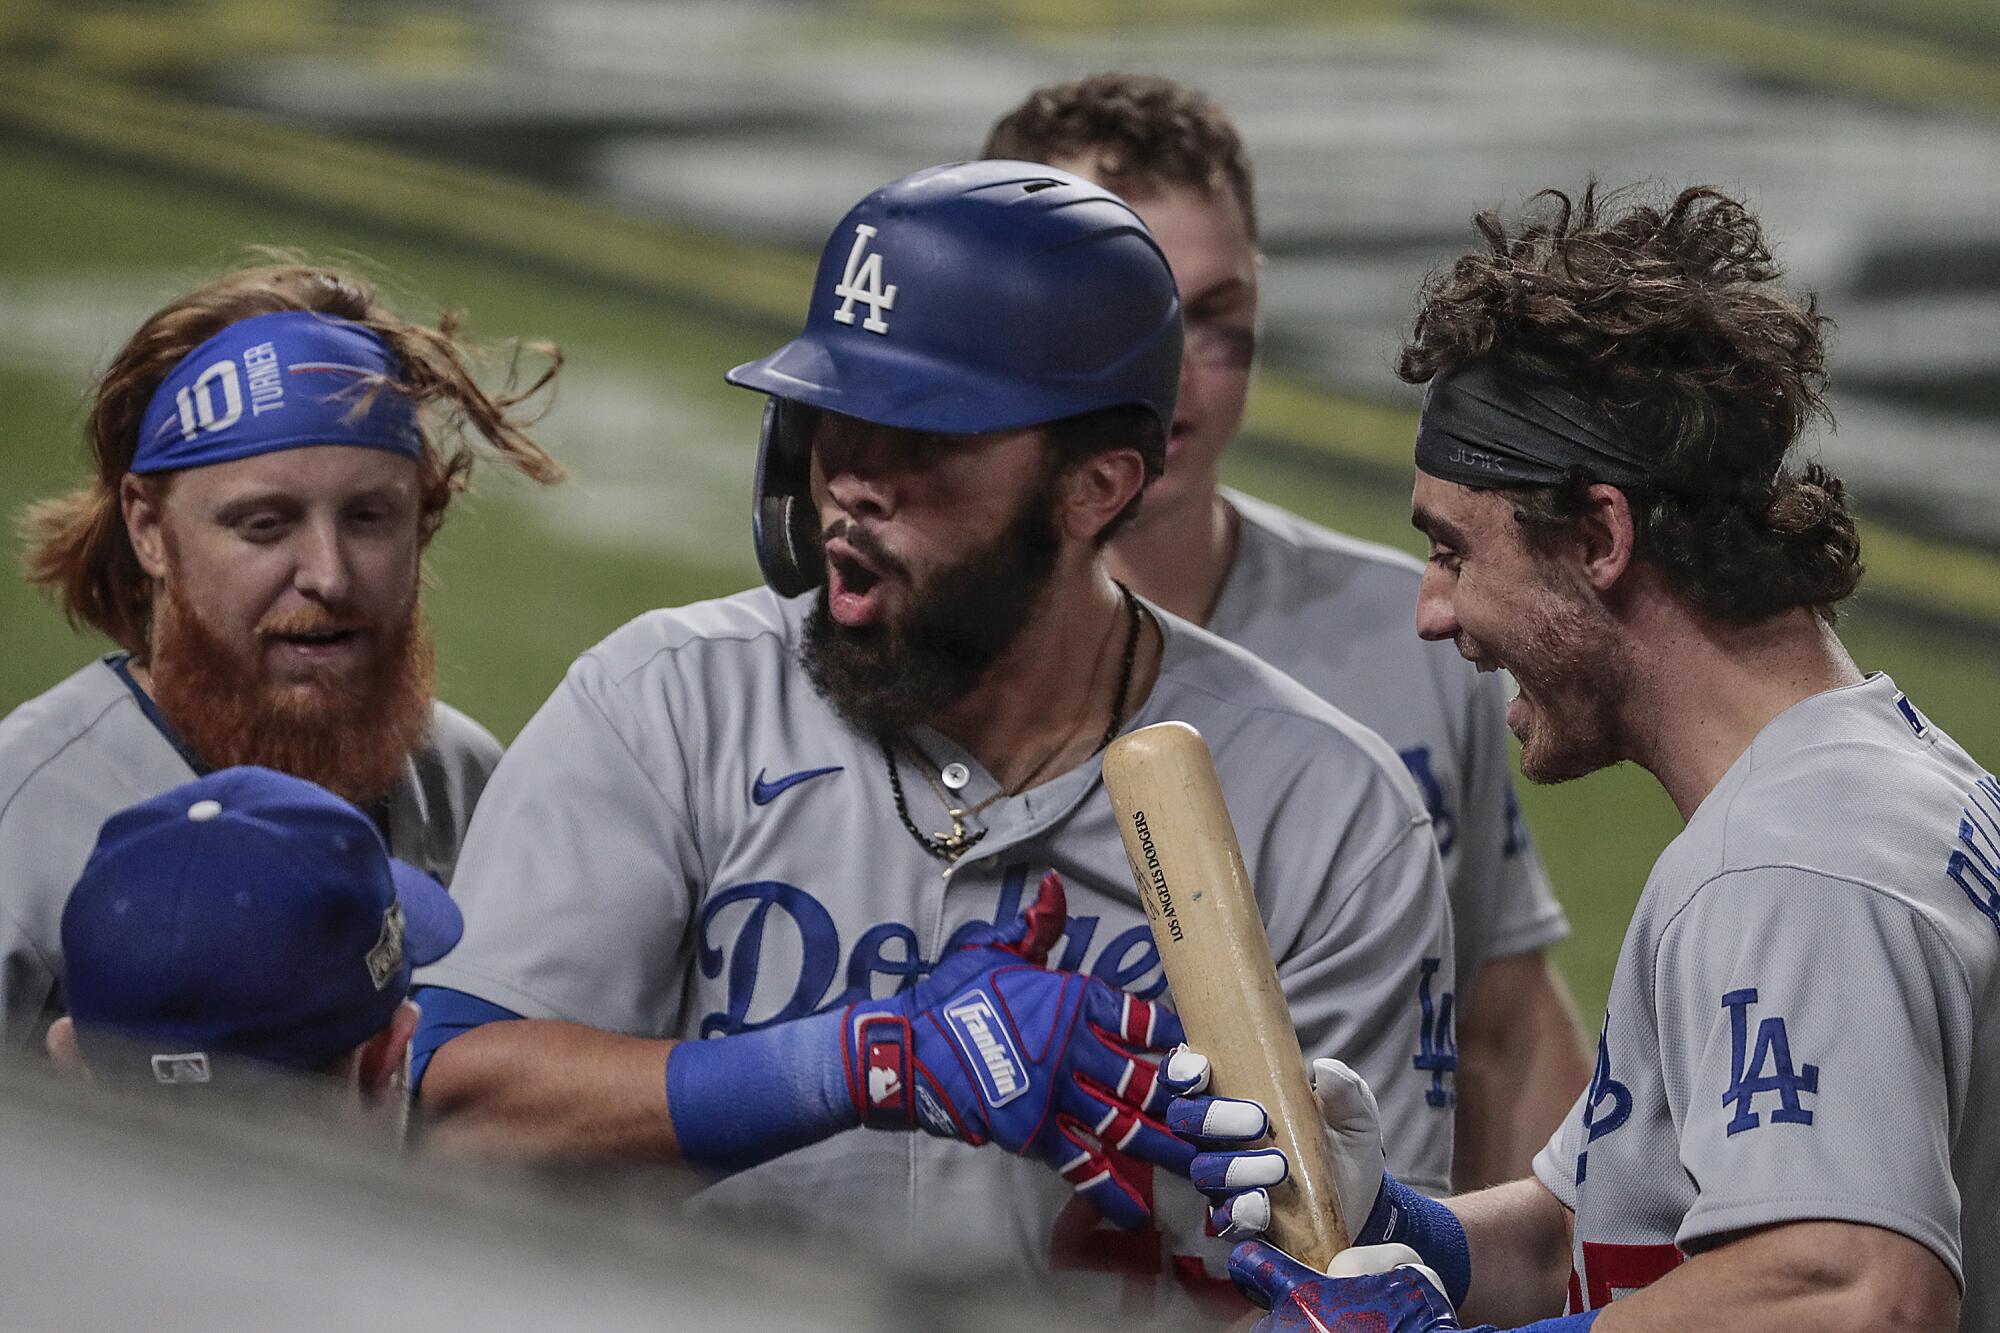 Photos: Dodgers lose to Atlanta Braves in Game 4 of NLCS - Los Angeles Times